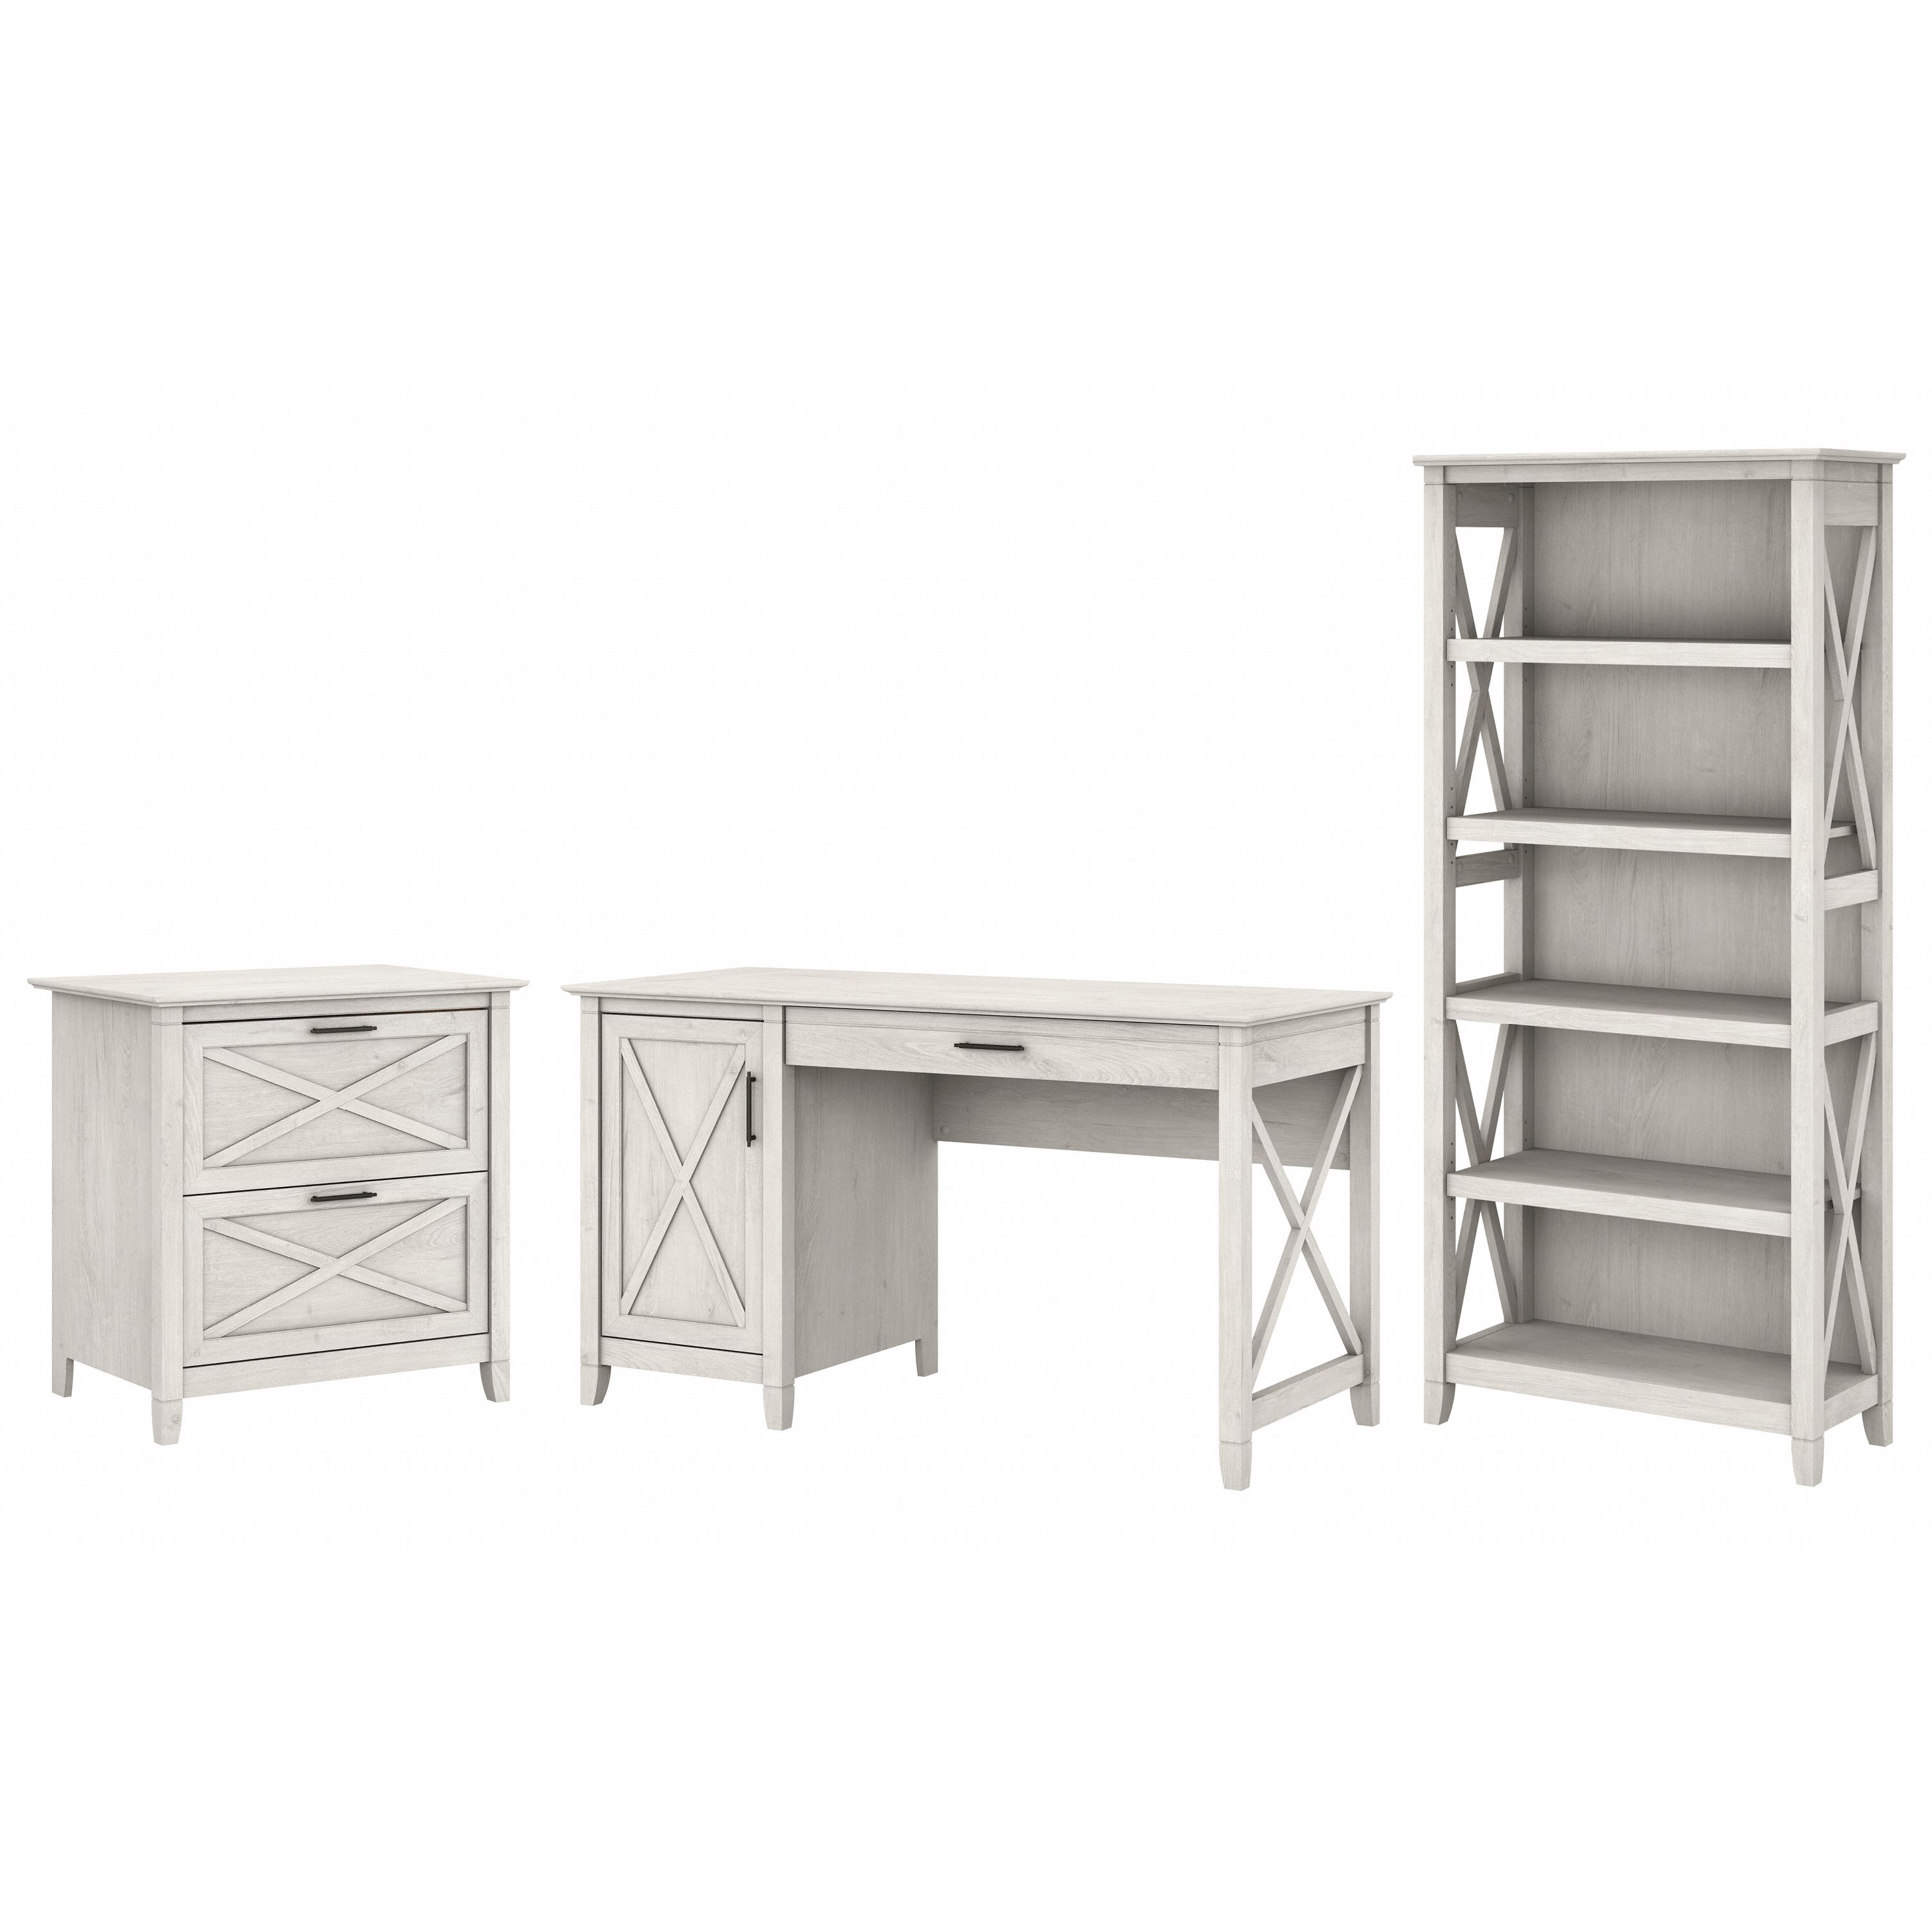 Shop Bush Furniture Key West 54W Computer Desk with 2 Drawer Lateral File Cabinet and 5 Shelf Bookcase 02 KWS009LW #color_linen white oak